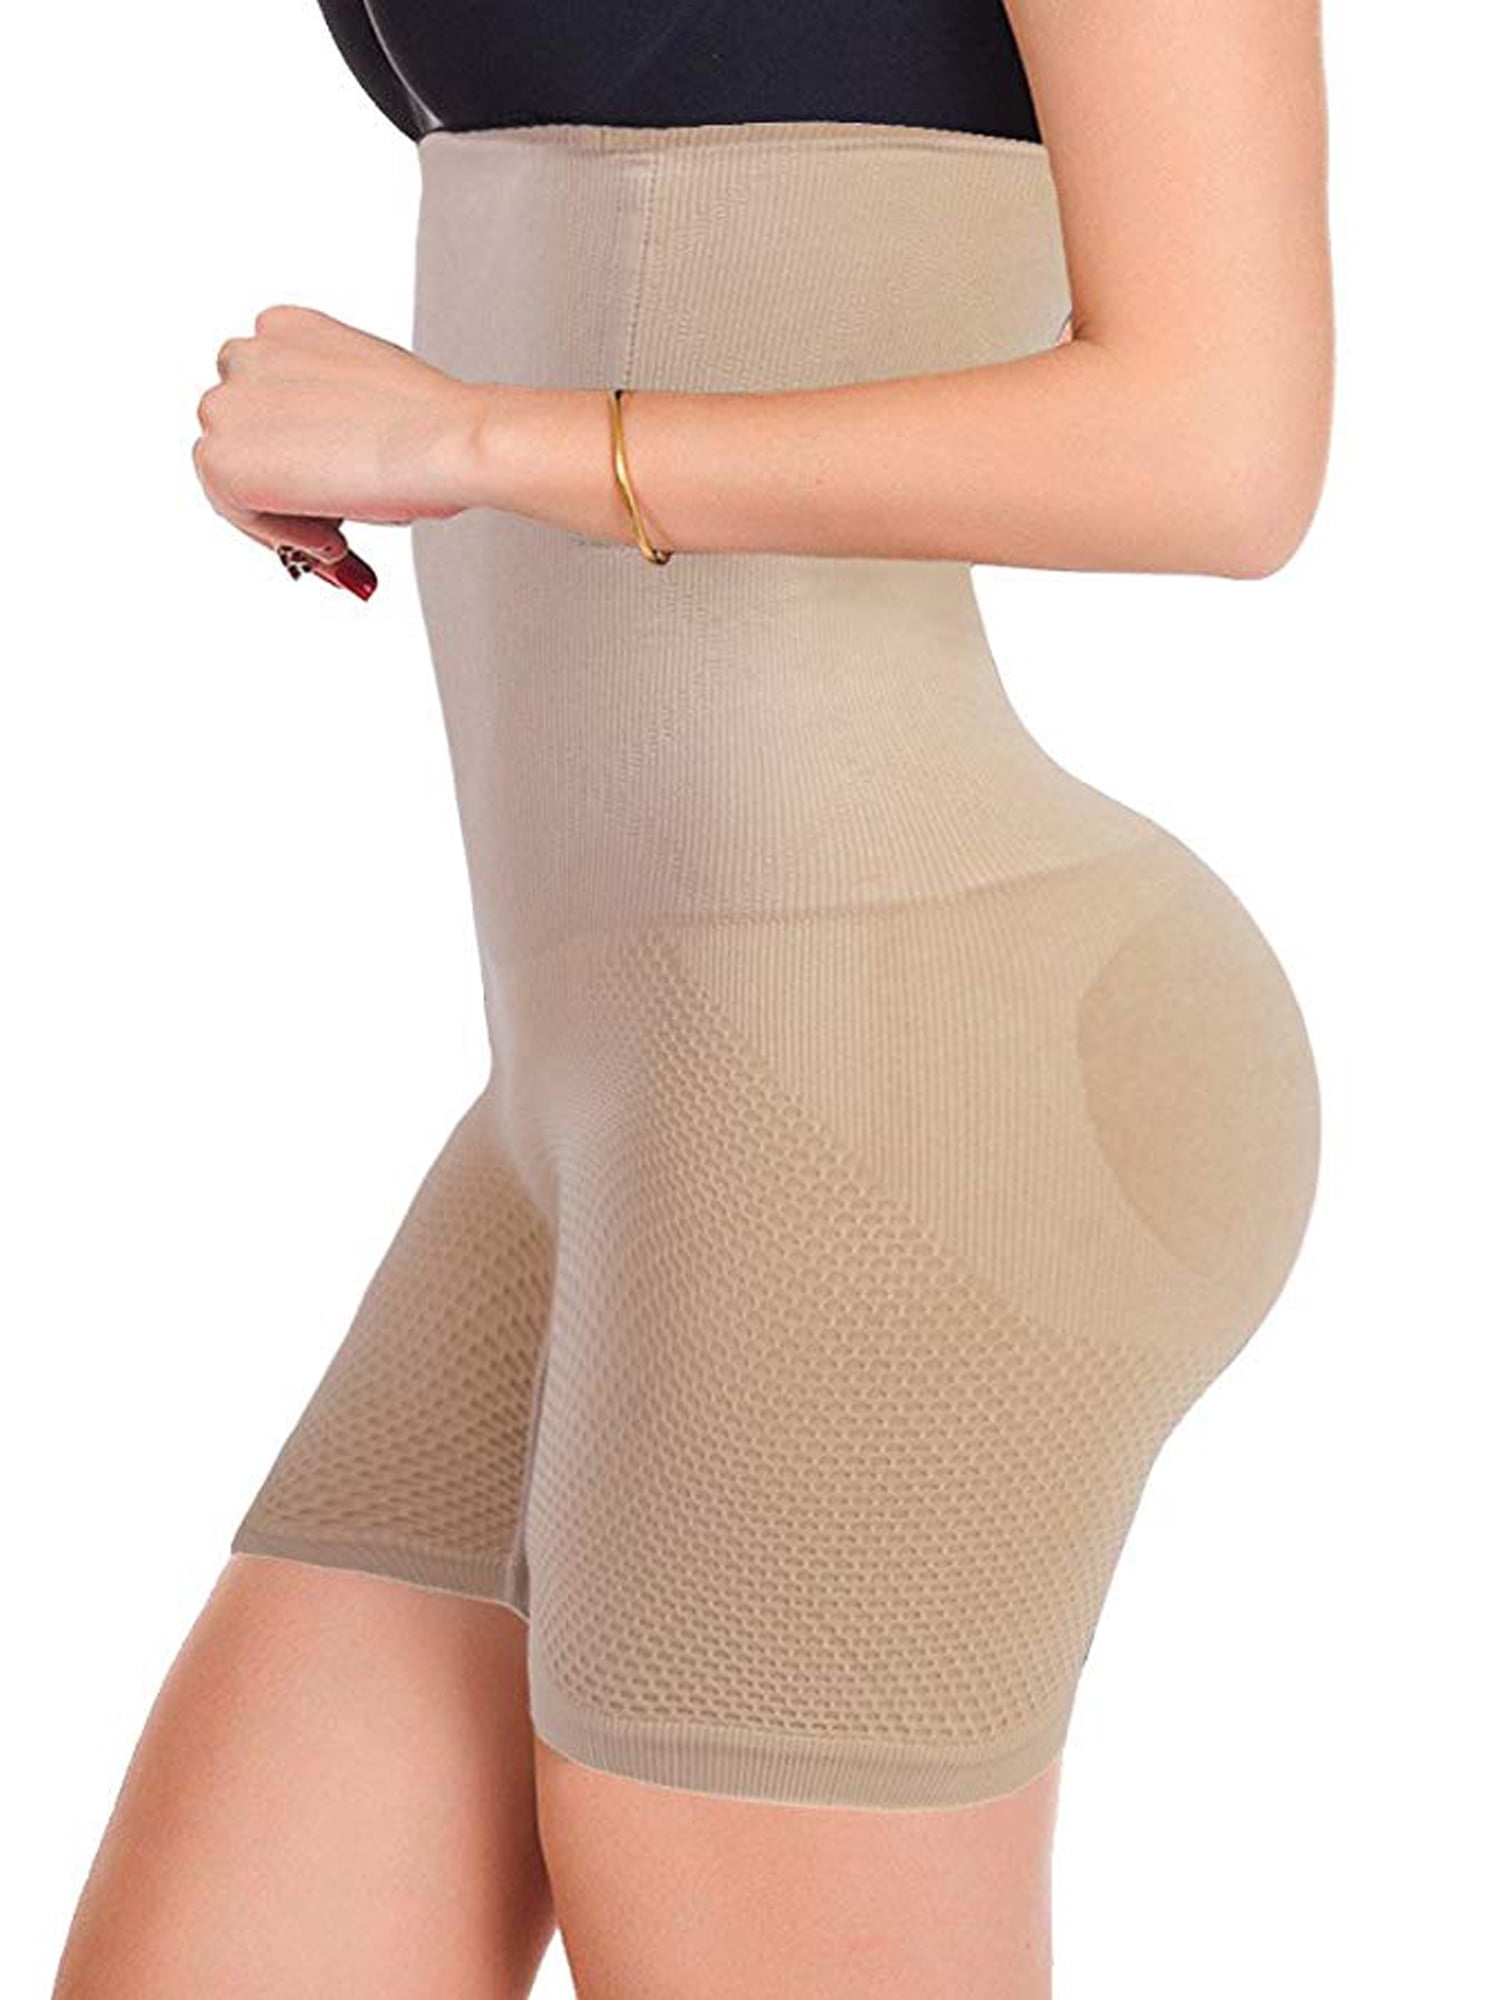 Waist train her - Fitness Shapewear. - Our hooked TUMMY CONTROL PANTY is  high waist designed to flatten tummy with moderate control,hold your stomach  in,make your abdomen smooth and slim,give you a